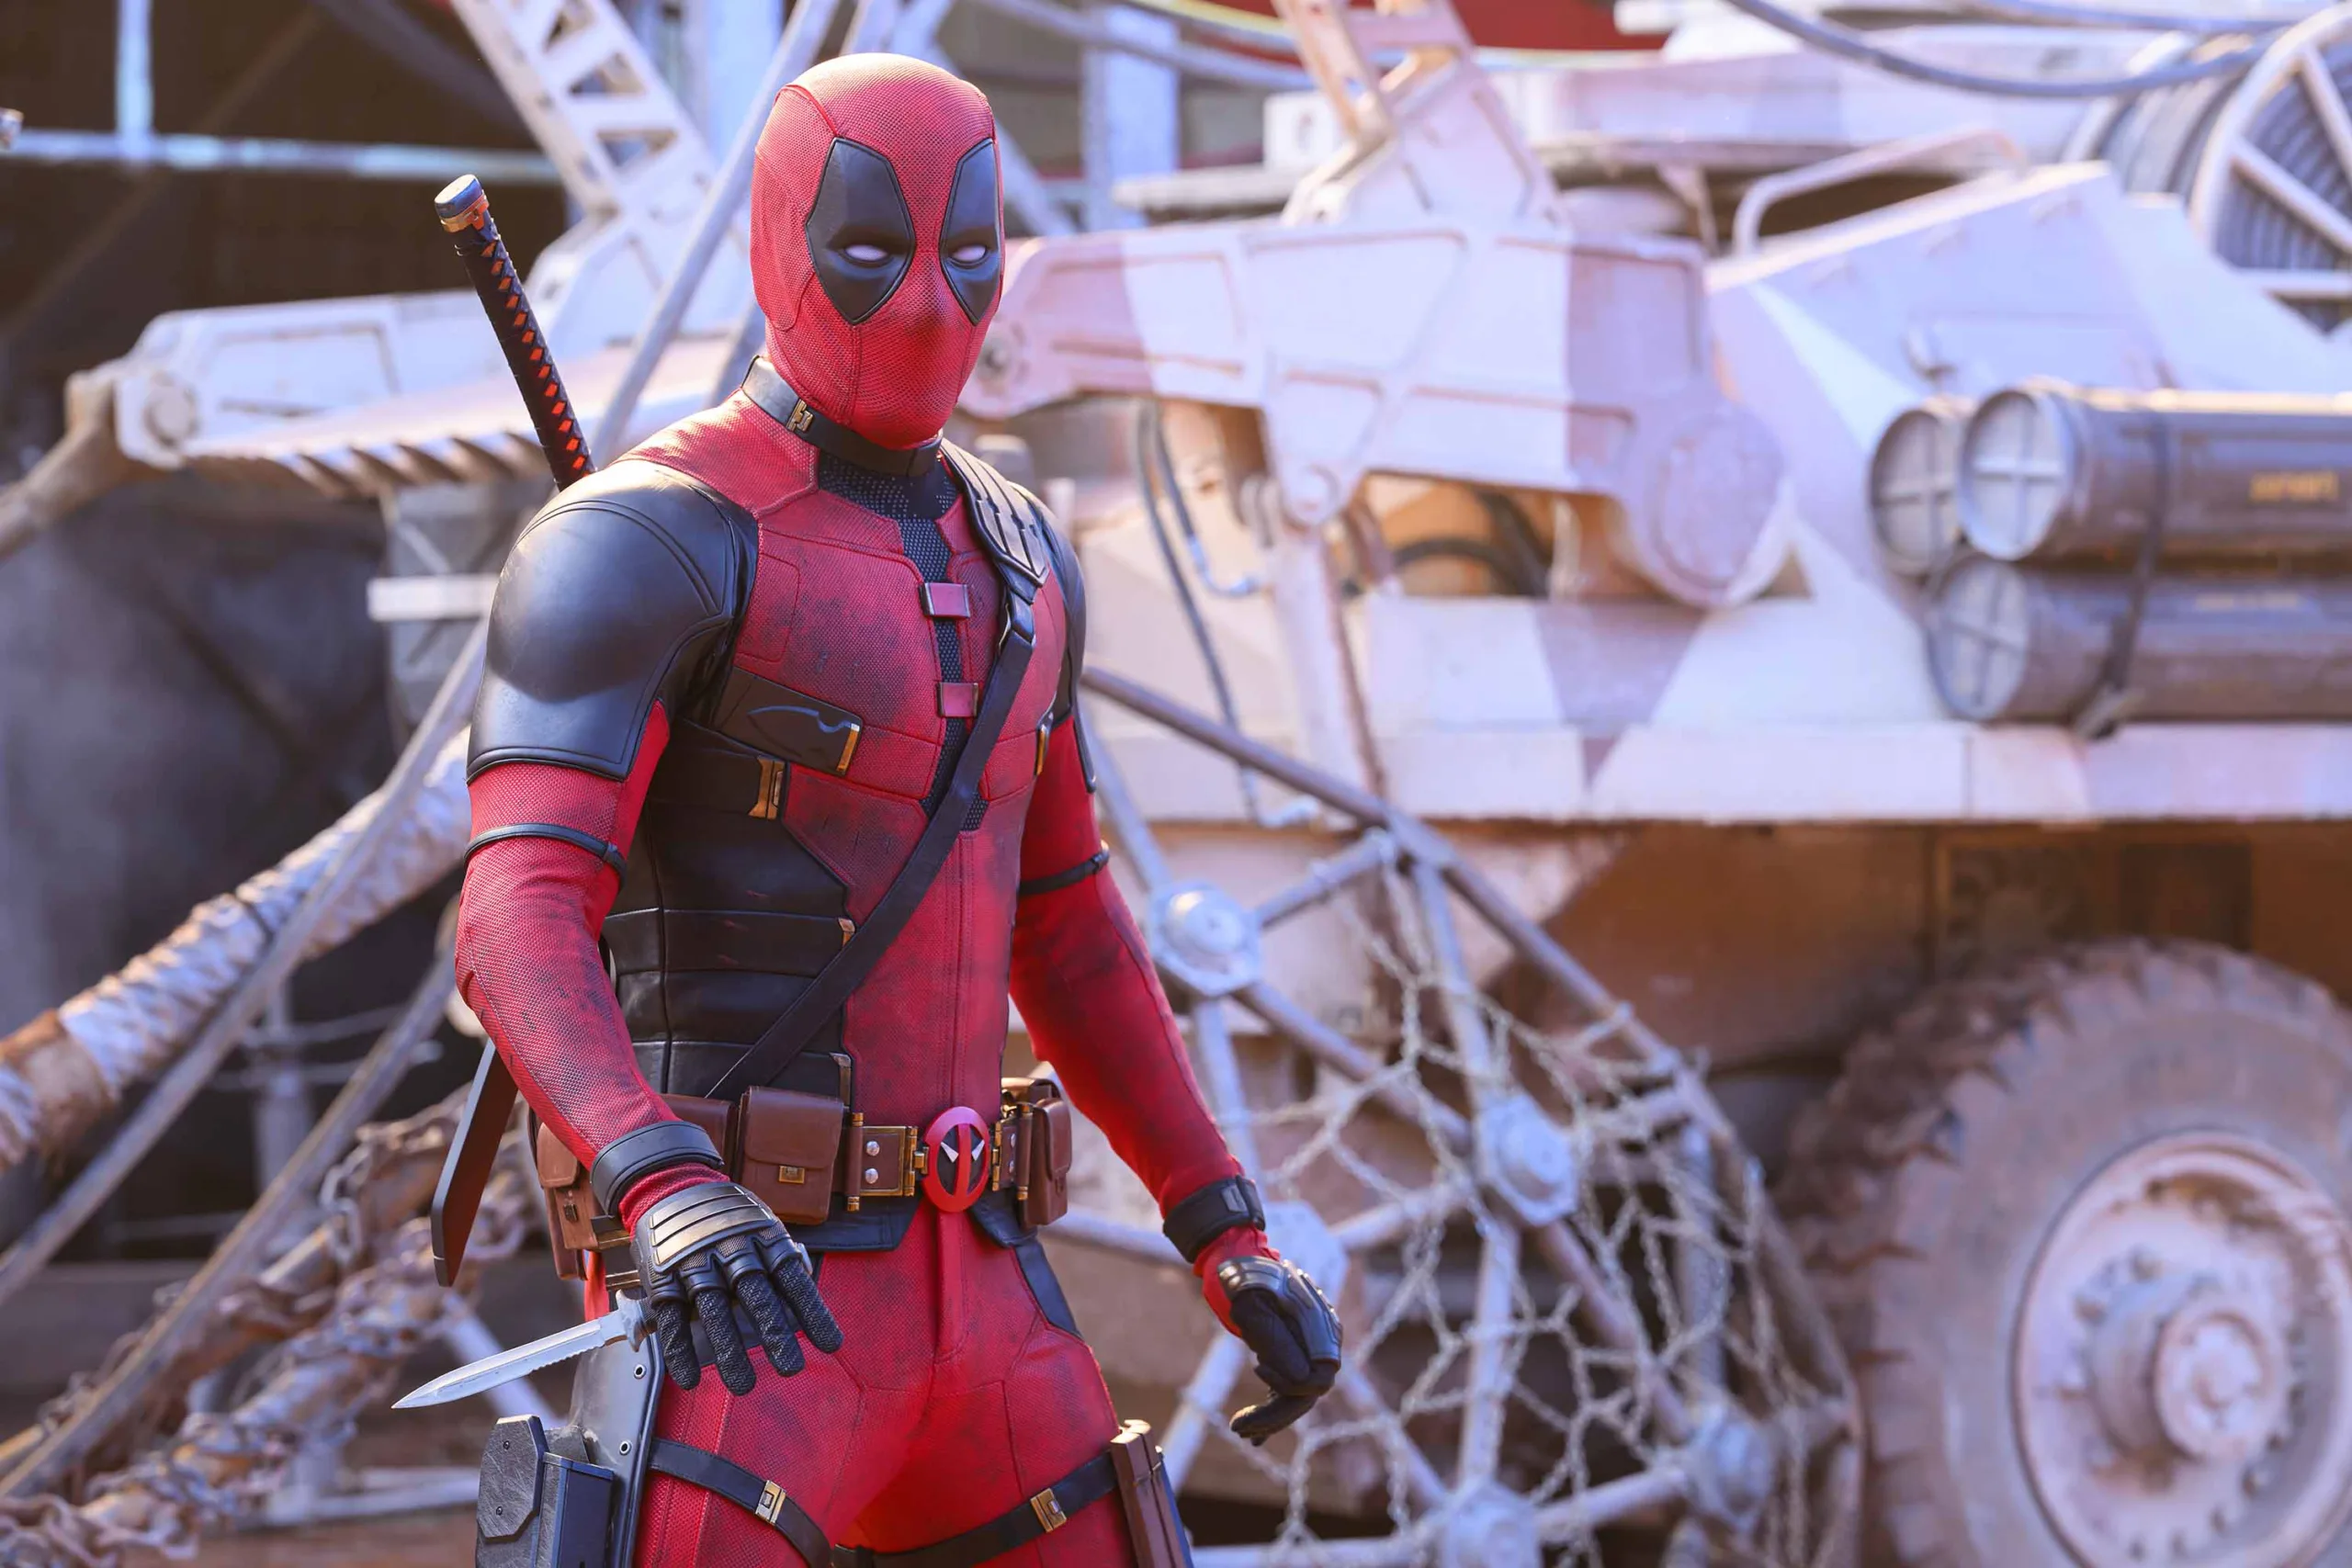 Deadpool & Wolverine cast: who’s back and who’s new?